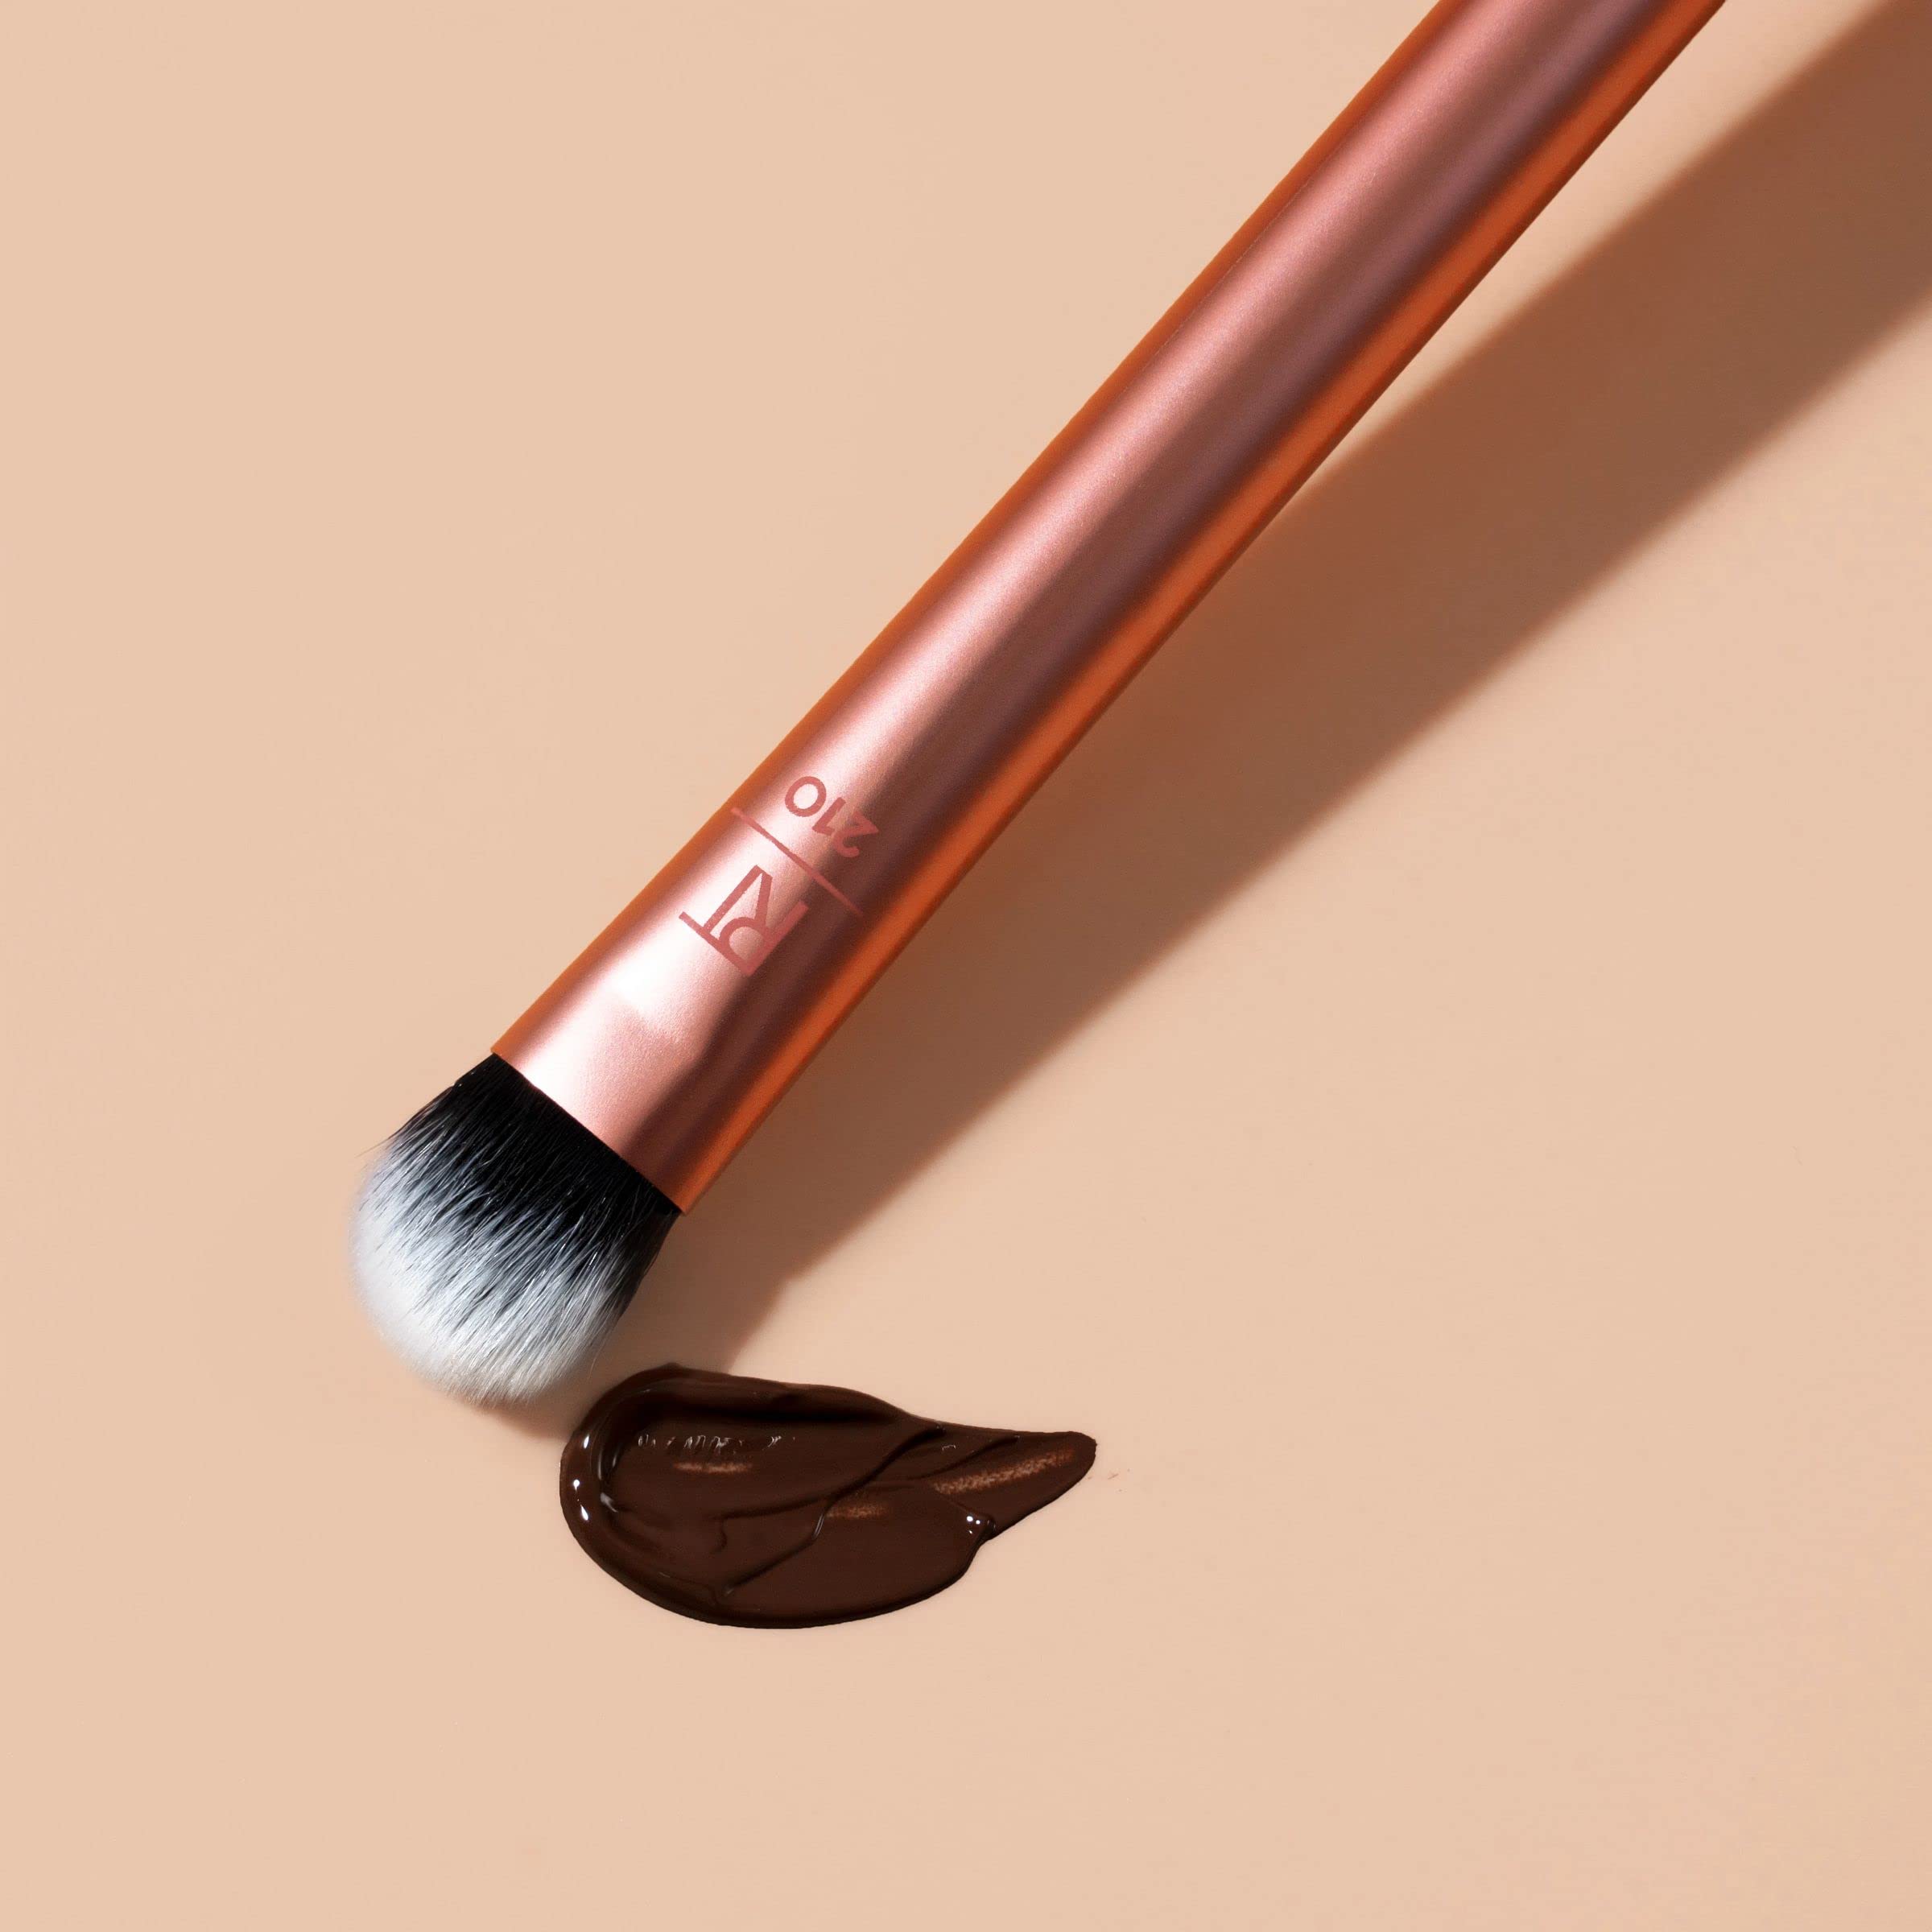 Real Techniques Expert Concealer Brush, Ultra Plush Custom Cut Synthetic Taklon Bristles & Extended Aluminum Ferrules, Uniquely Shaped Brush Head, For Even Coverage, Orange Face Brush, 1 Count